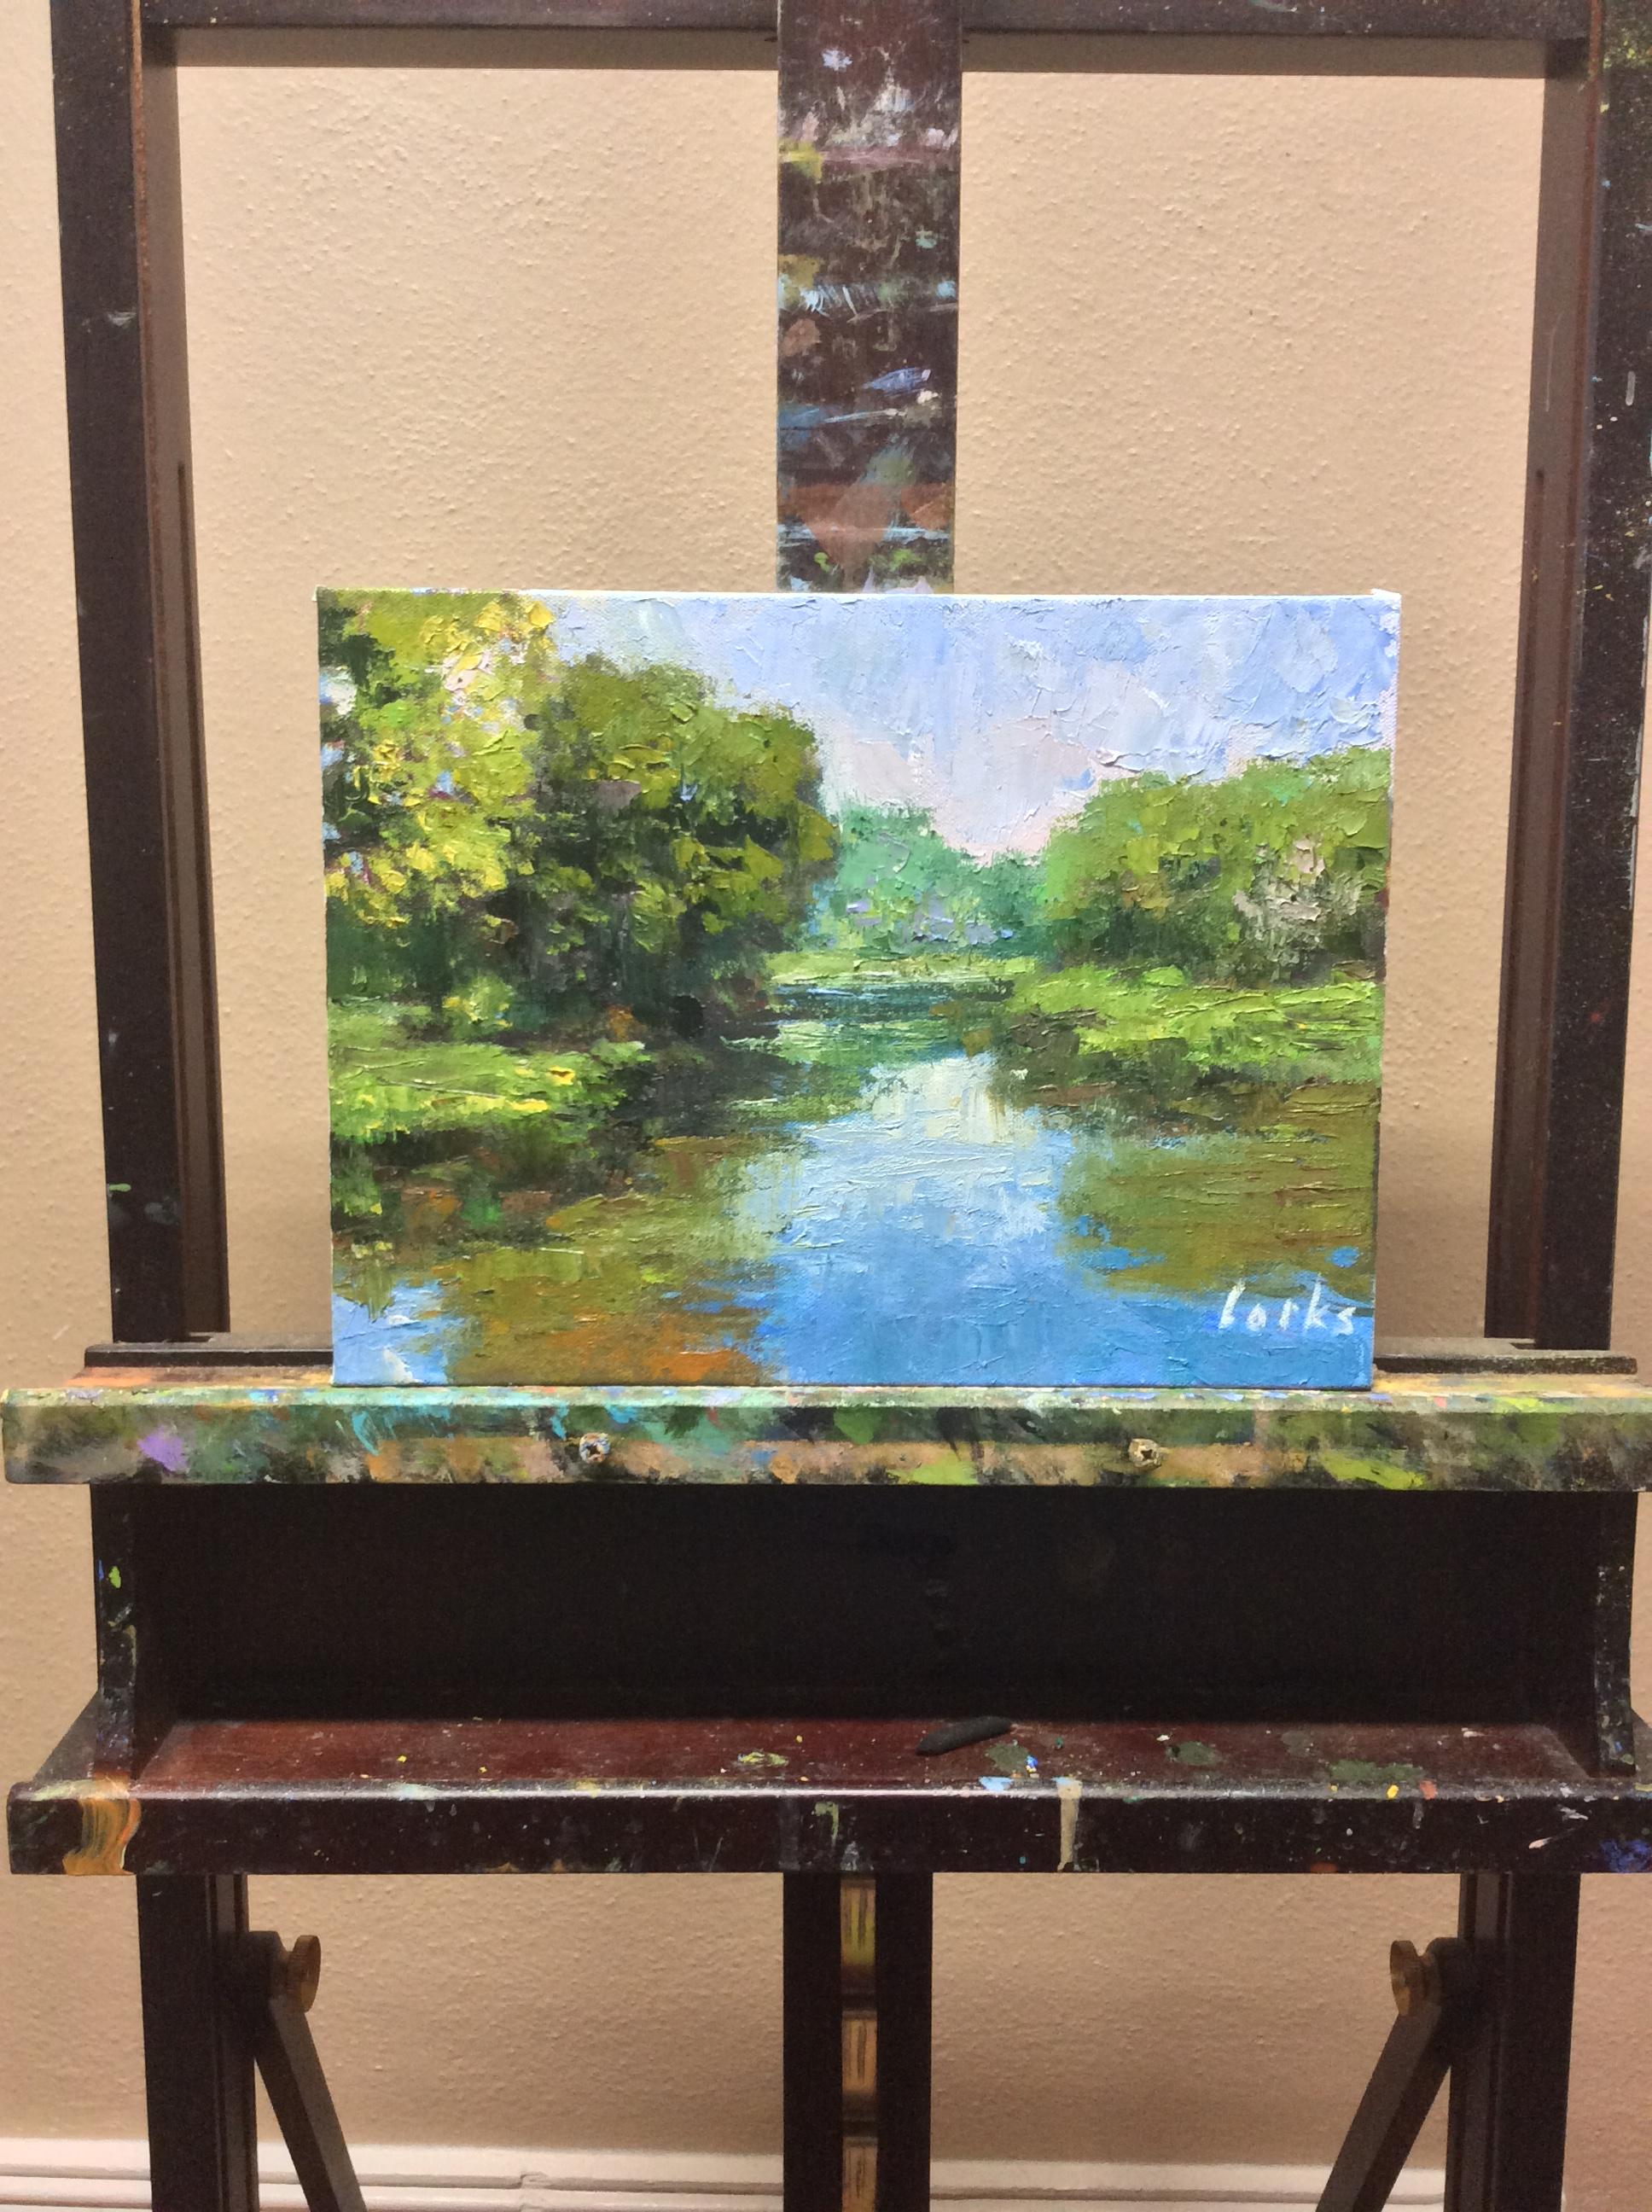 <p>Artist Comments<br />A scene from the Texas hill country, I love painting the combination of land, sky and water. I used a palette knife to apply the paint fairly thick and achieve a textured surface.</p><p>About the Artist<br />David has always